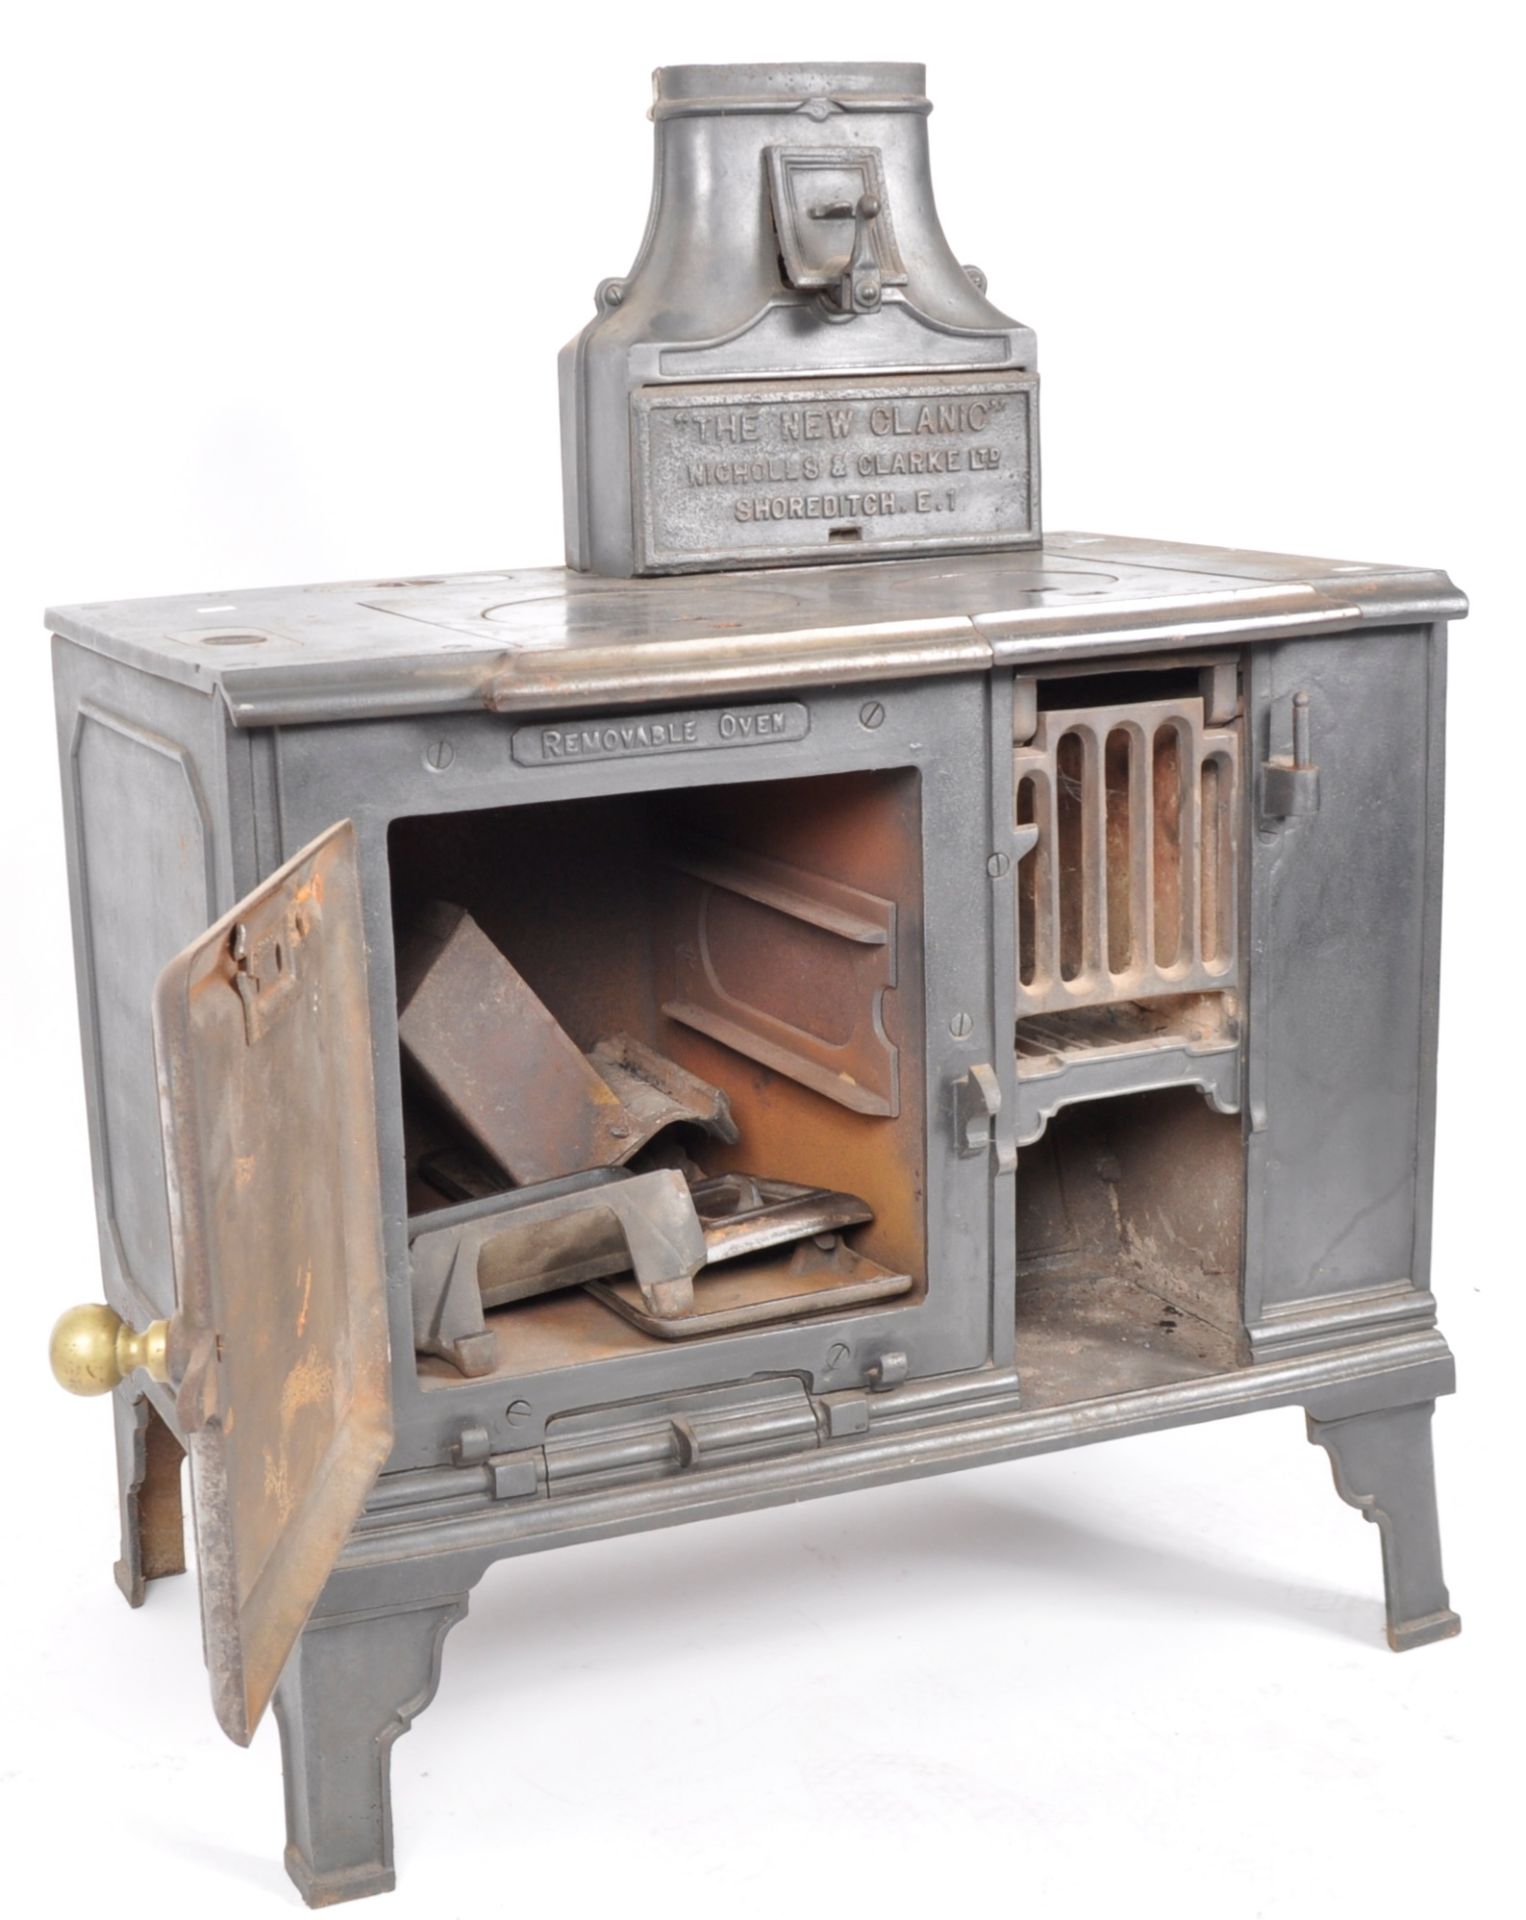 19TH CENTURY VICTORIAN CAST IRON OVEN STOVE - Image 5 of 6